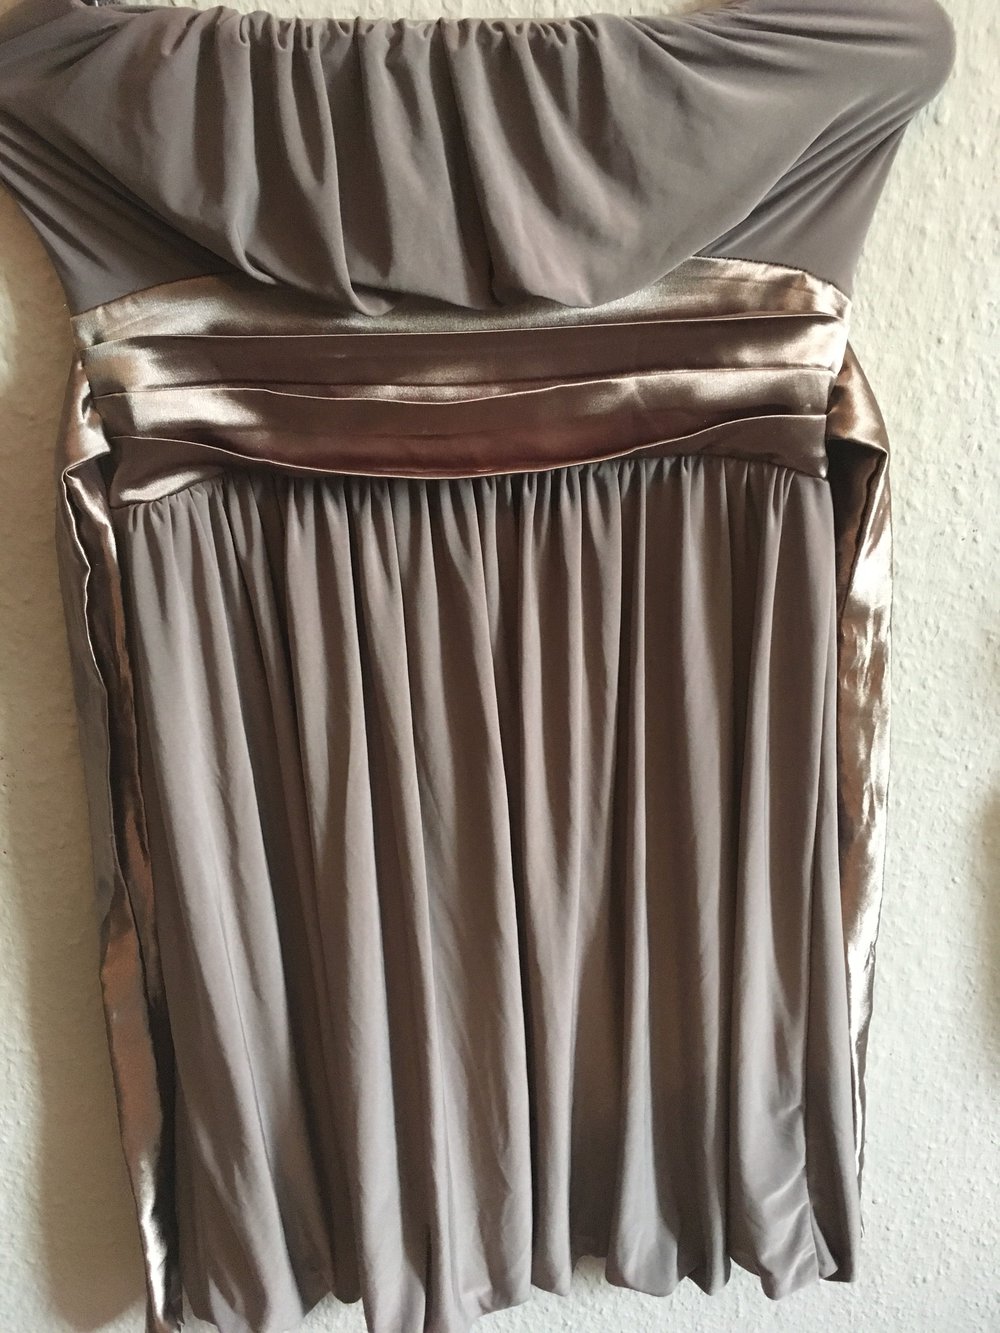 Kleid in taupe